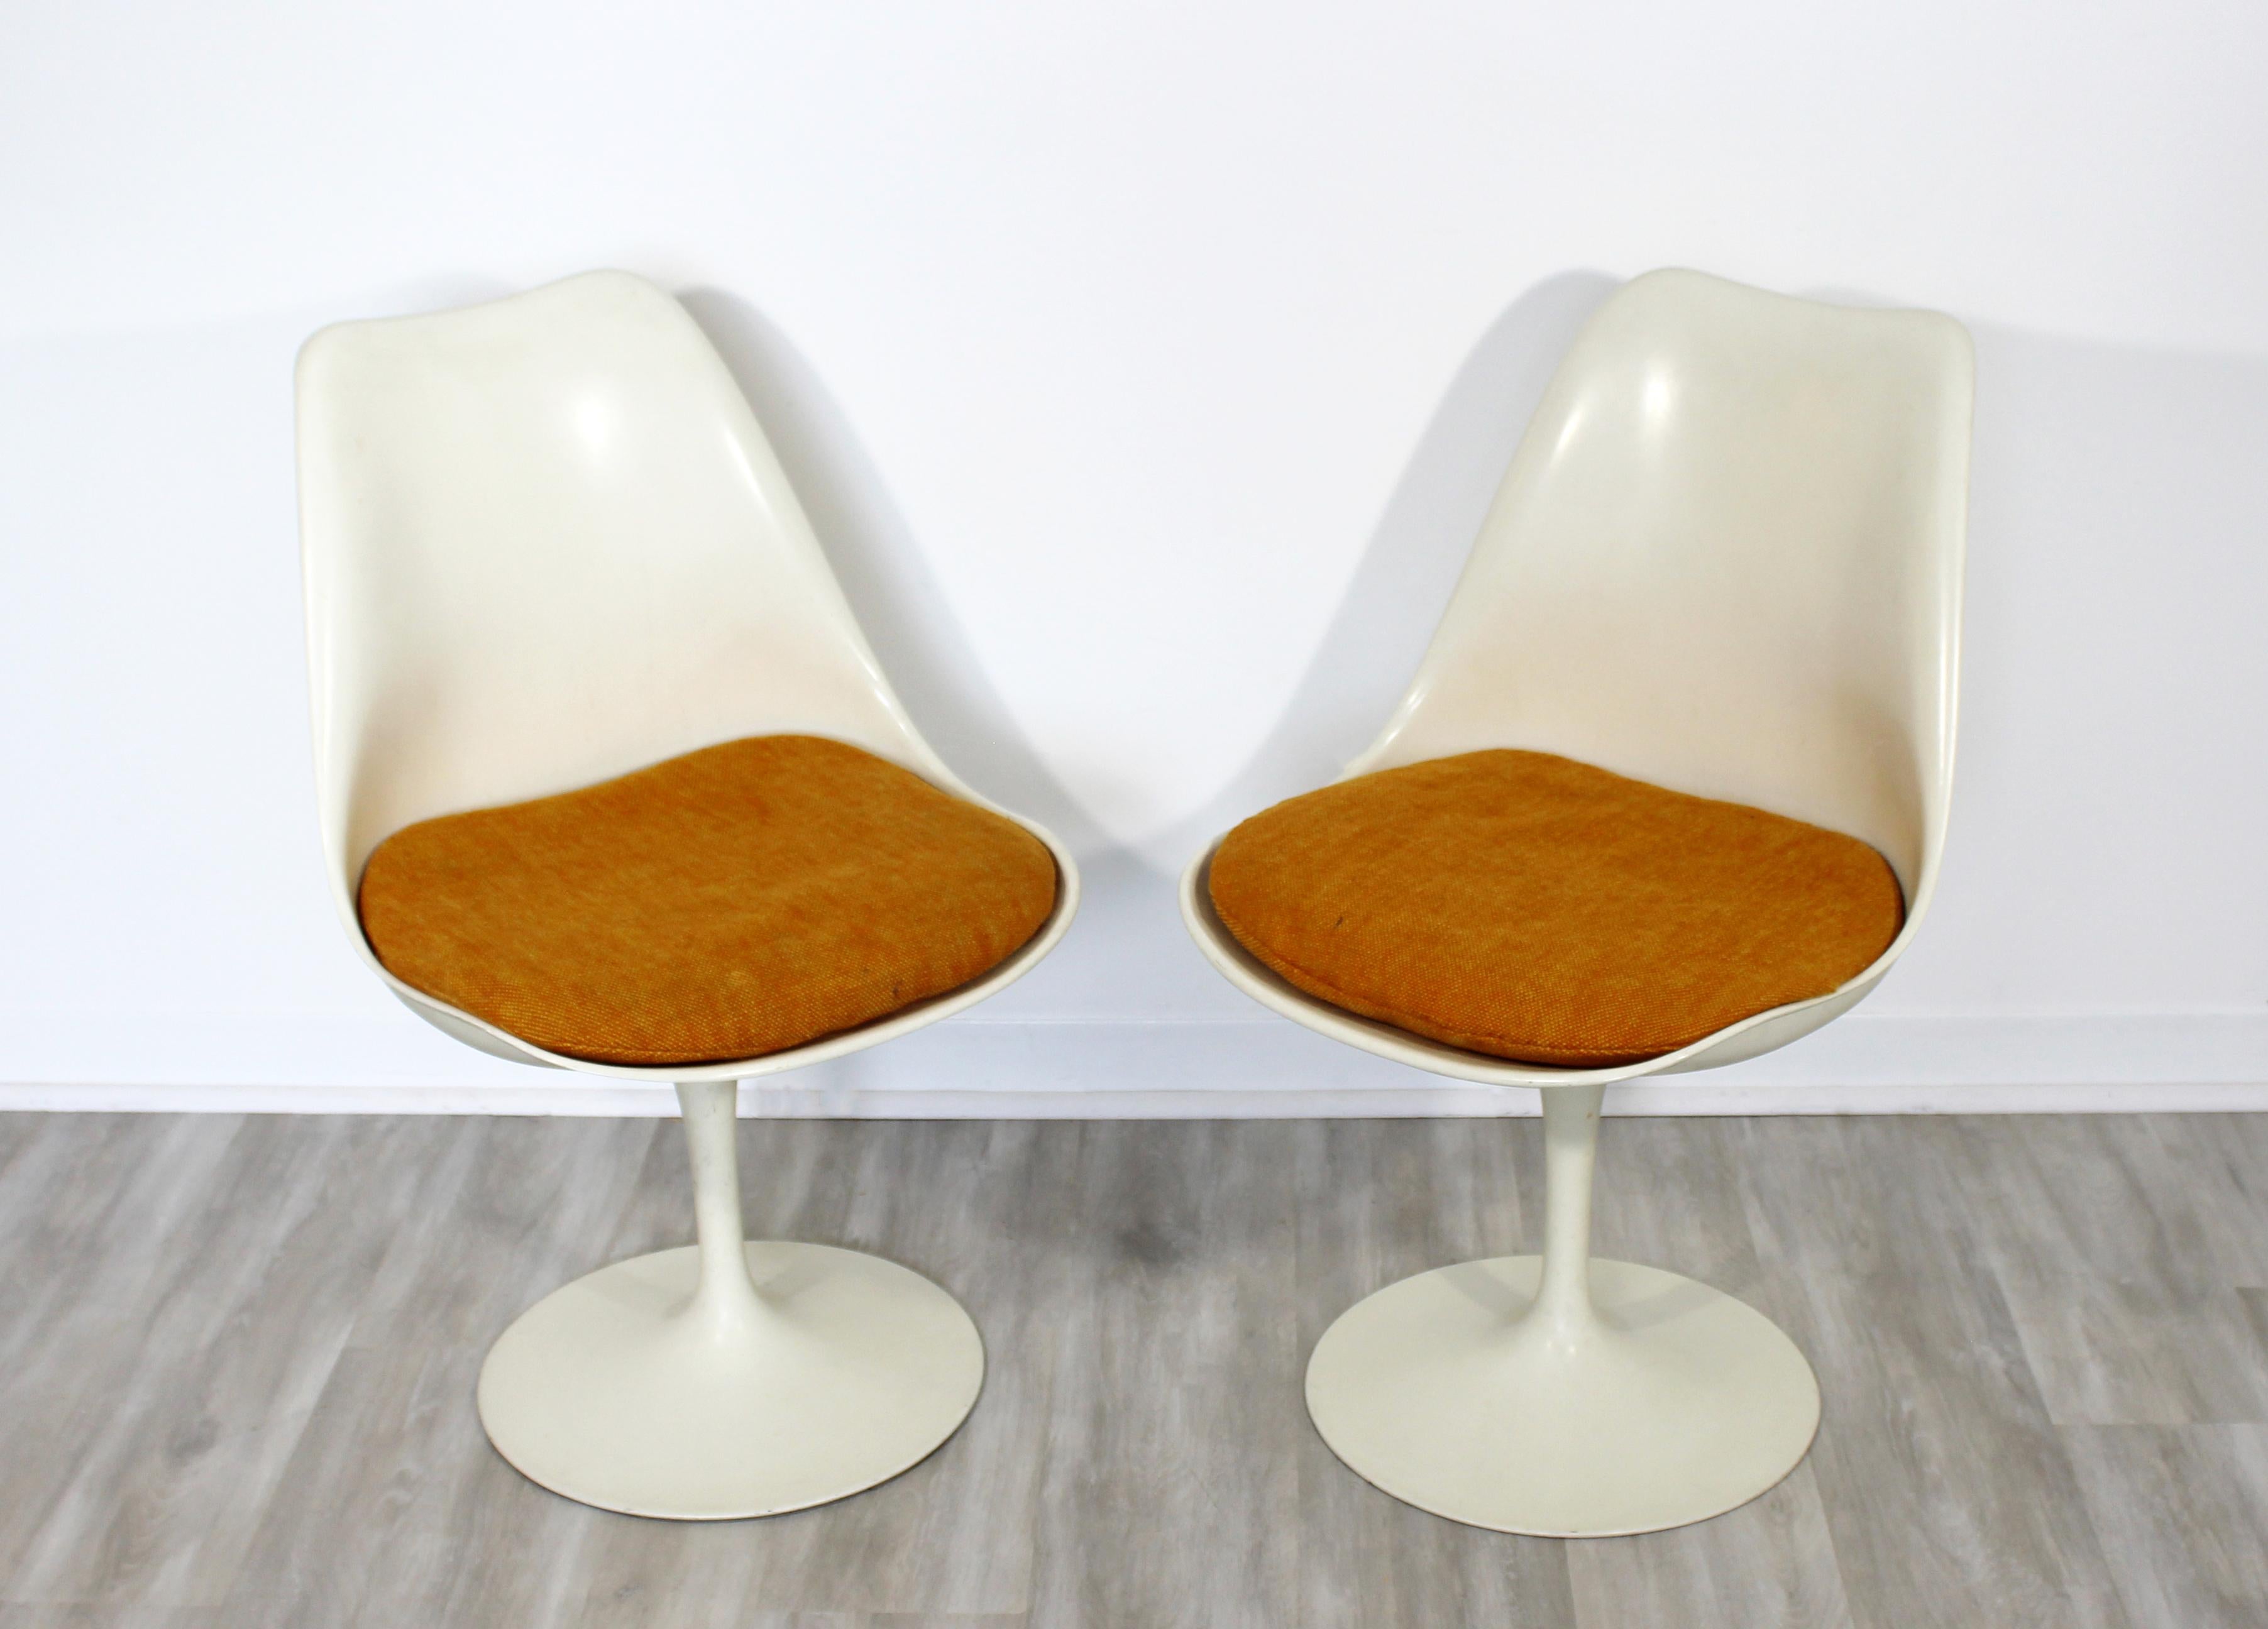 For your consideration is a fantastic, original set of five Tulip side dining chairs, with orange seats, by Eero Saarinen for Knoll, circa the 1960s. In very good vintage condition. The dimensions are 19